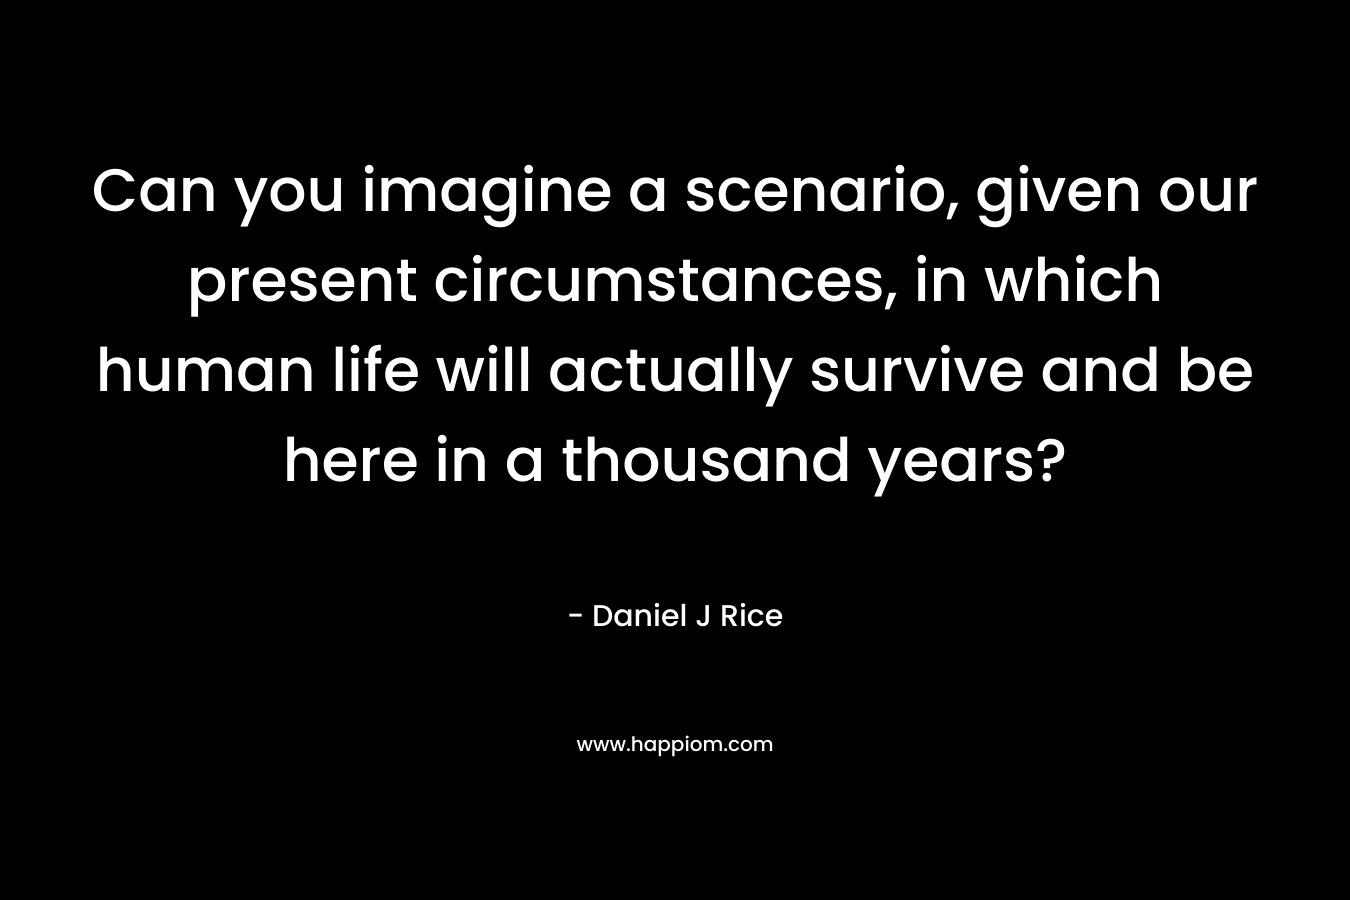 Can you imagine a scenario, given our present circumstances, in which human life will actually survive and be here in a thousand years?